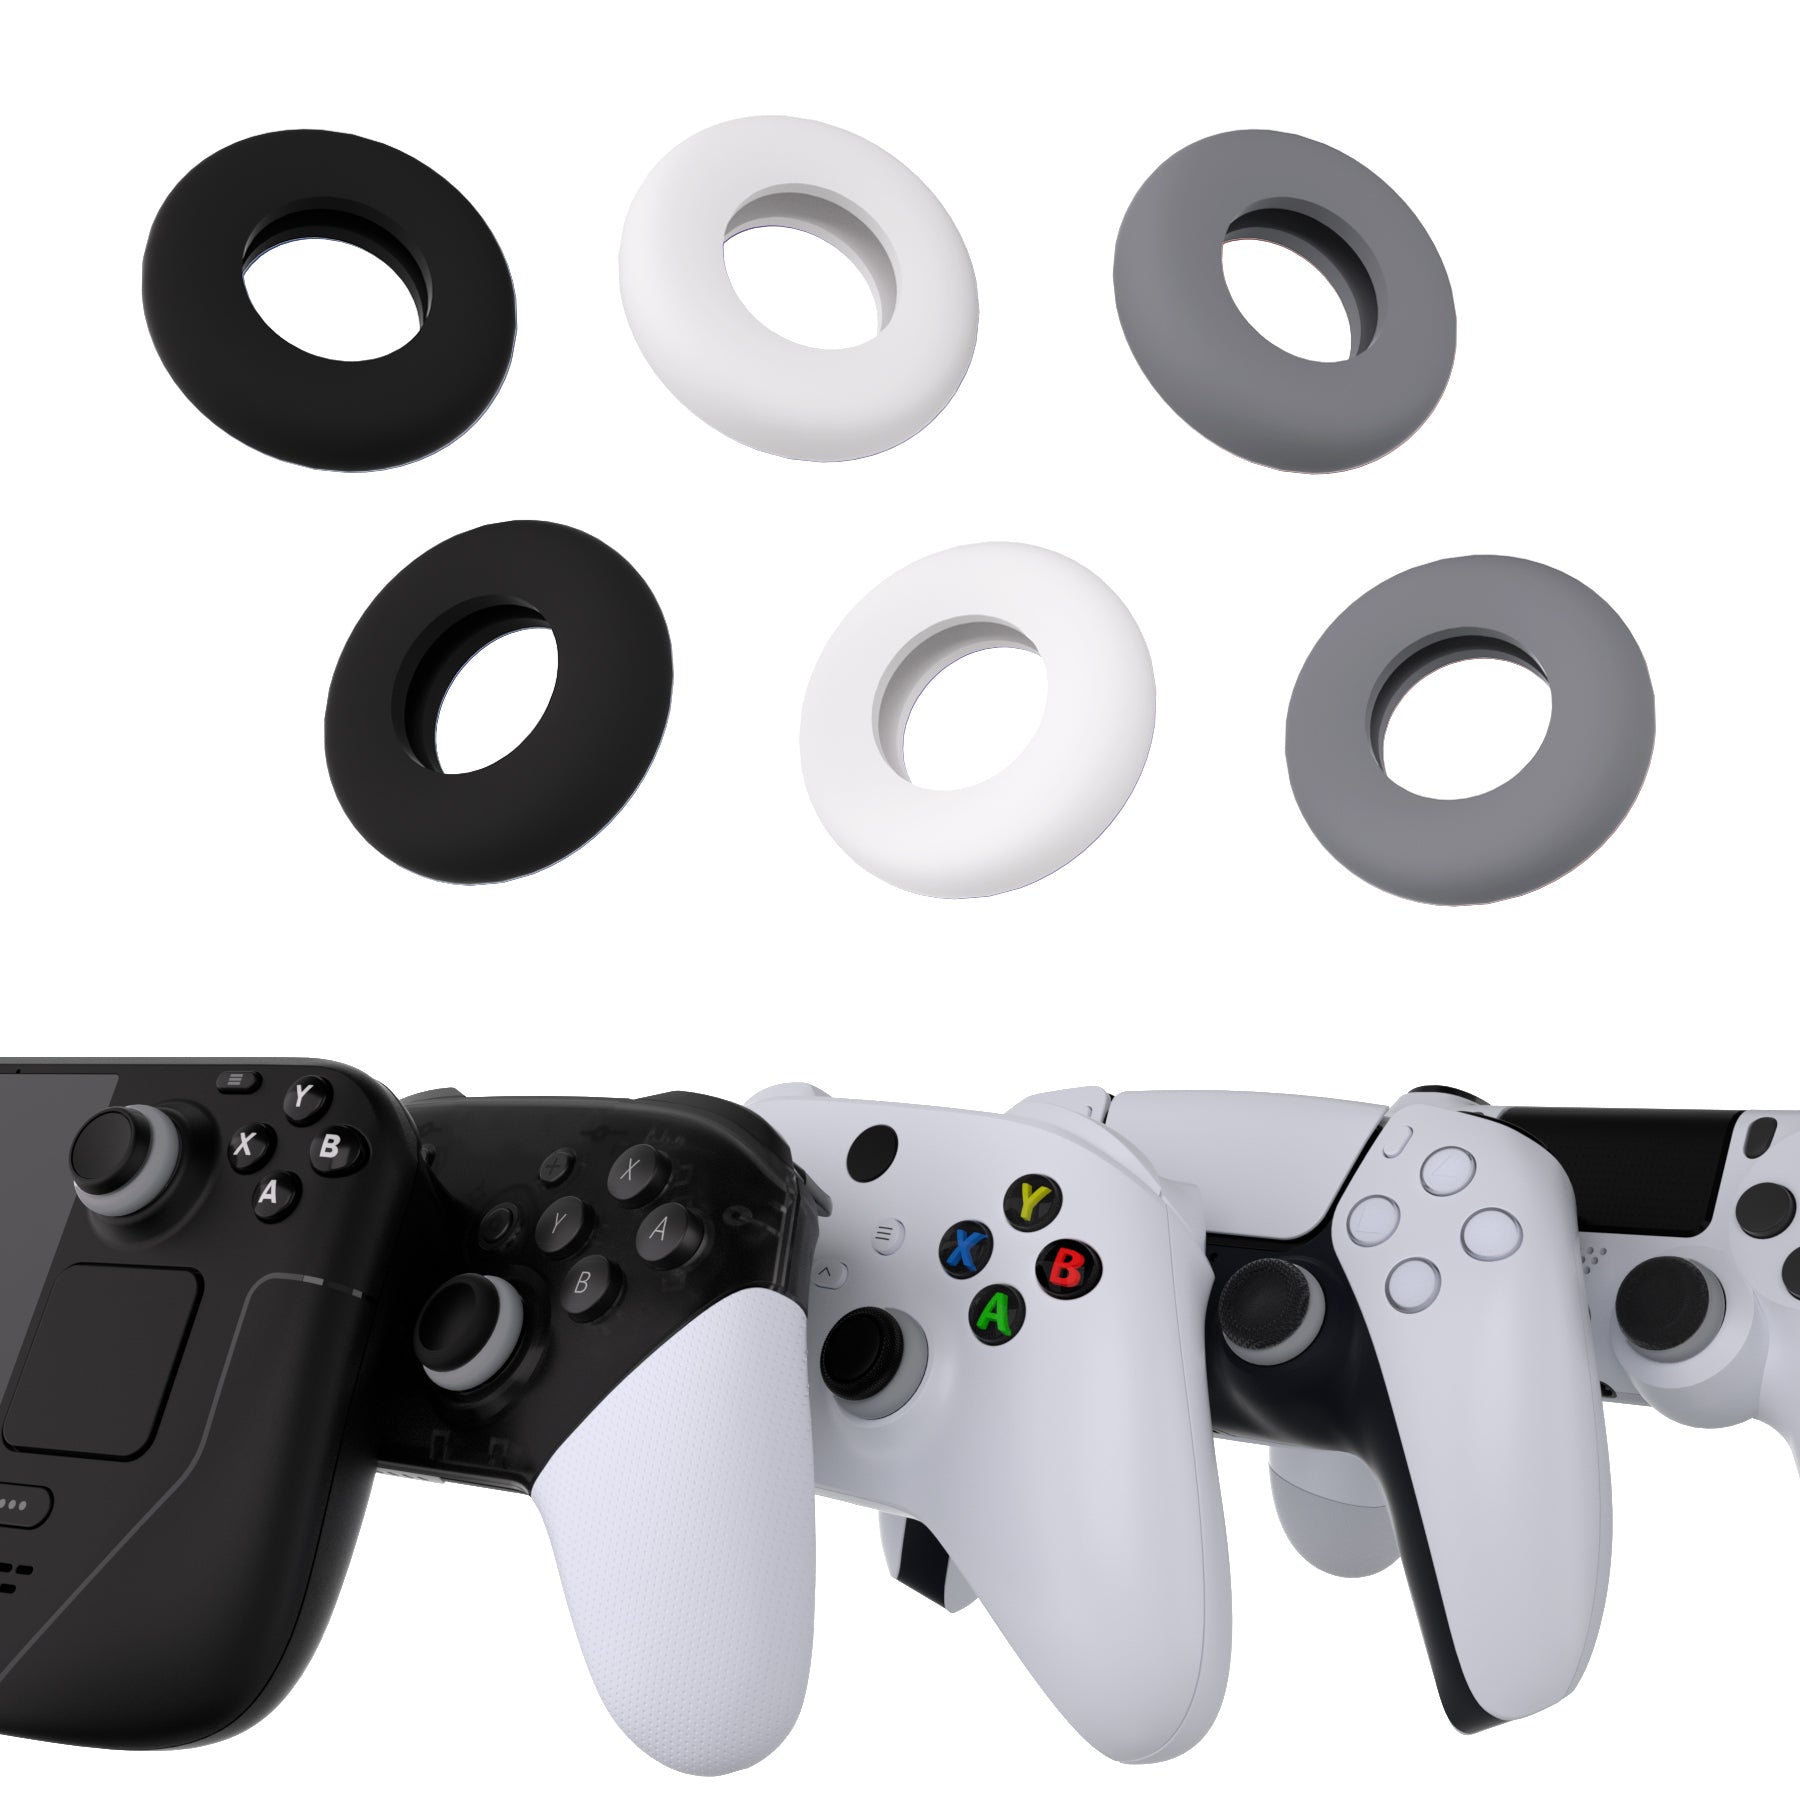 PlayVital 3 Pairs Silicone BuffeRings Aim Assist Target Motion Control Precision Rings for PS5, for PS4, for Xbox Series X/S, Xbox One, Xbox 360, for Switch Pro, for Steam Deck - 3 Different Strengths - PFPJ110 PlayVital